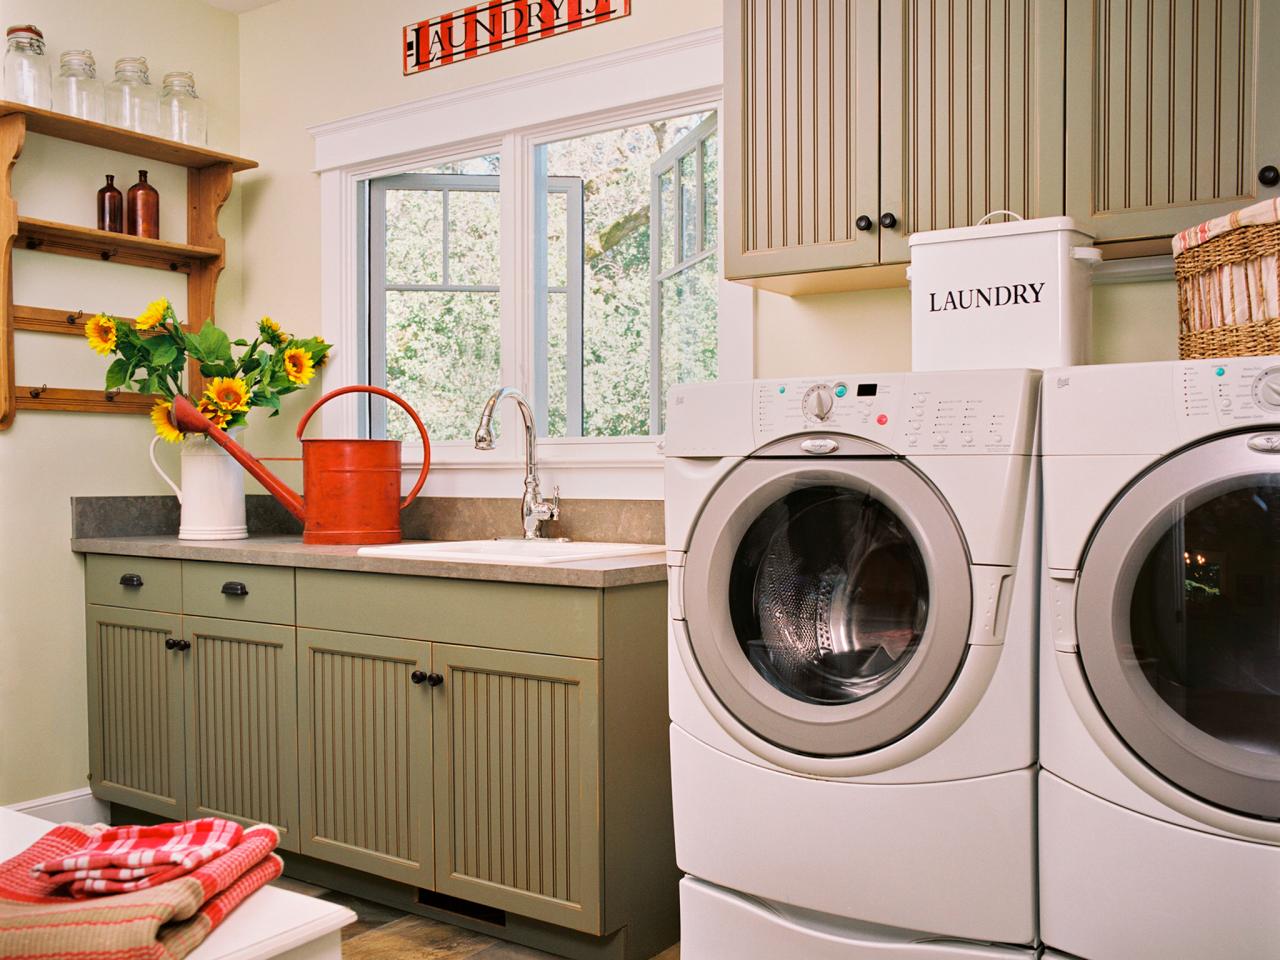 Laundry Room Makeover Ideas Pictures Options Tips Advice Hgtv